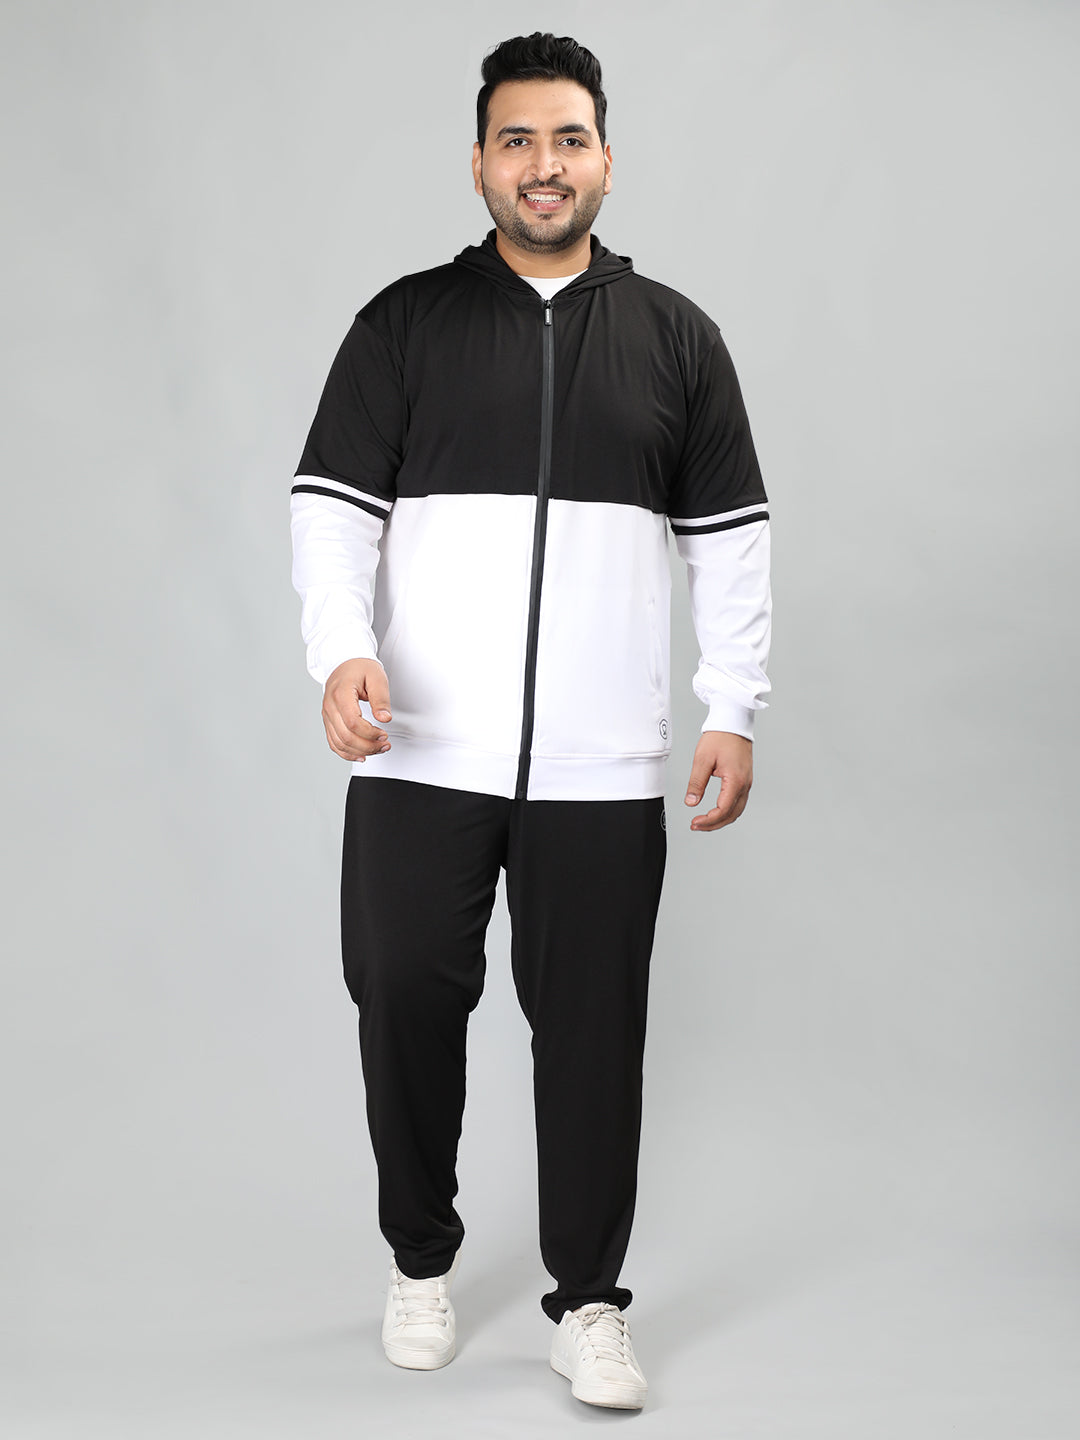 Men's Tracksuit For Athletics Jogging Gym And Sports | CHKOKKO